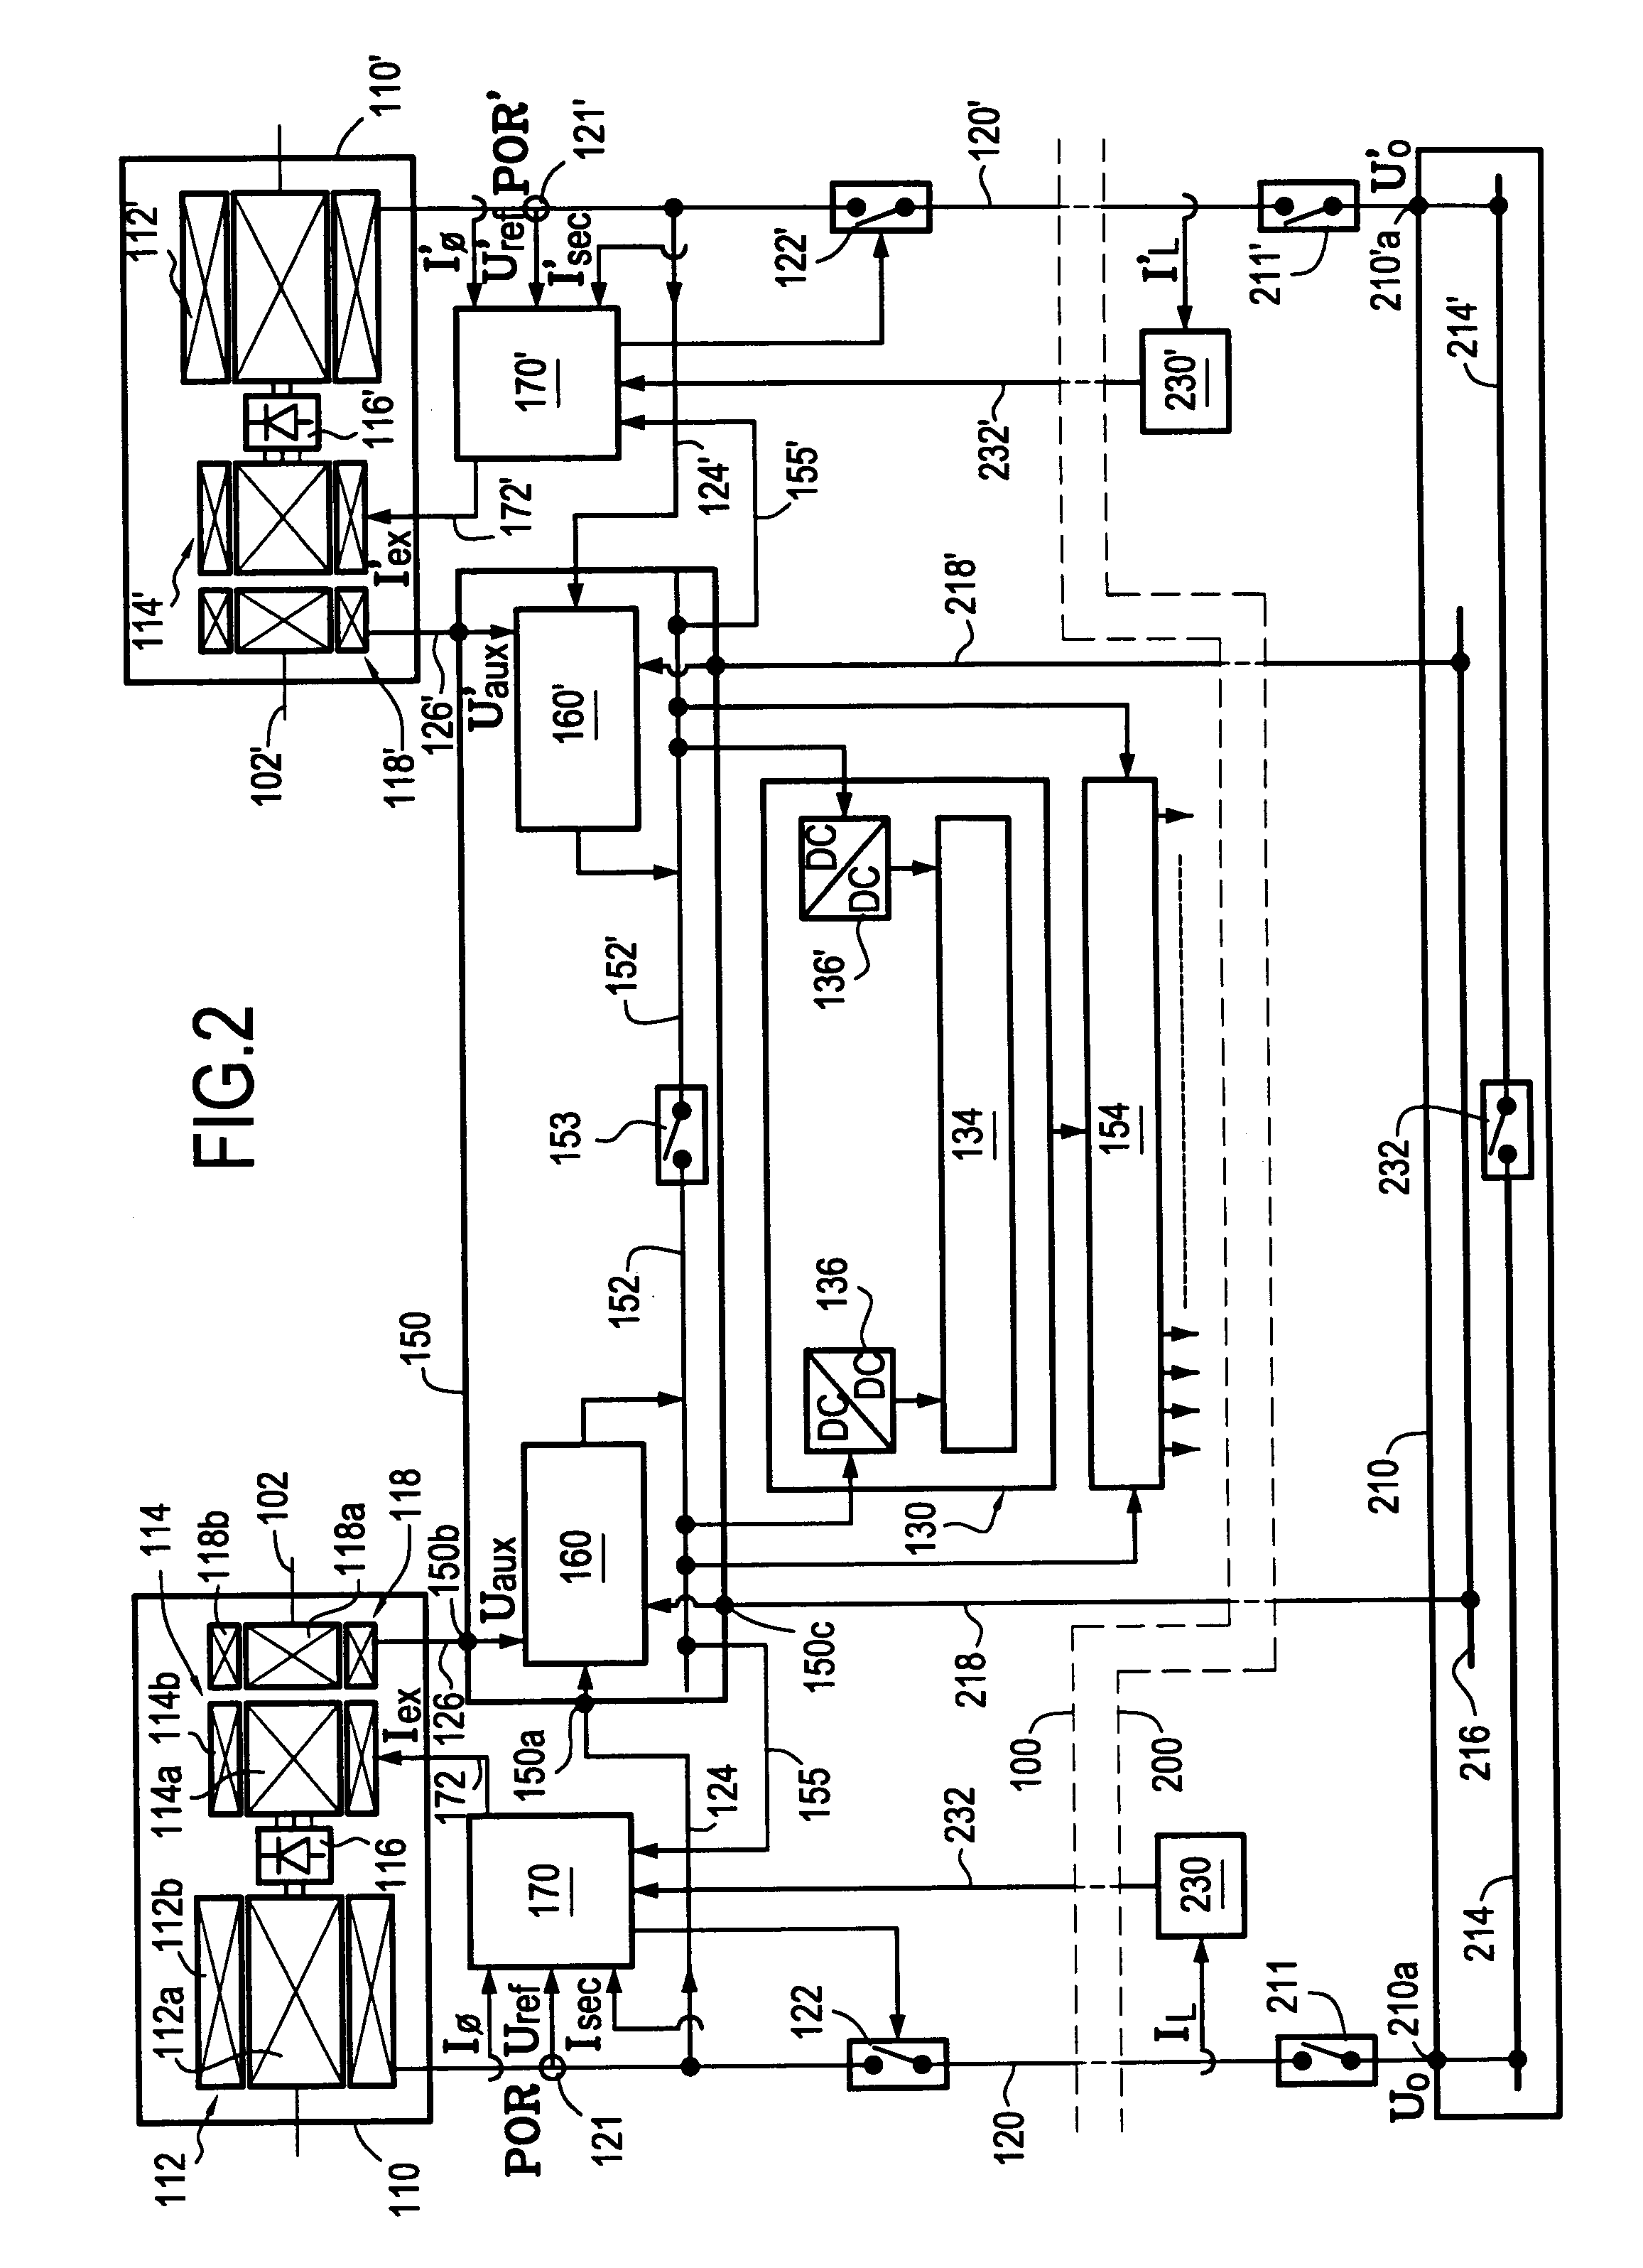 Electrical power supply for an aircraft